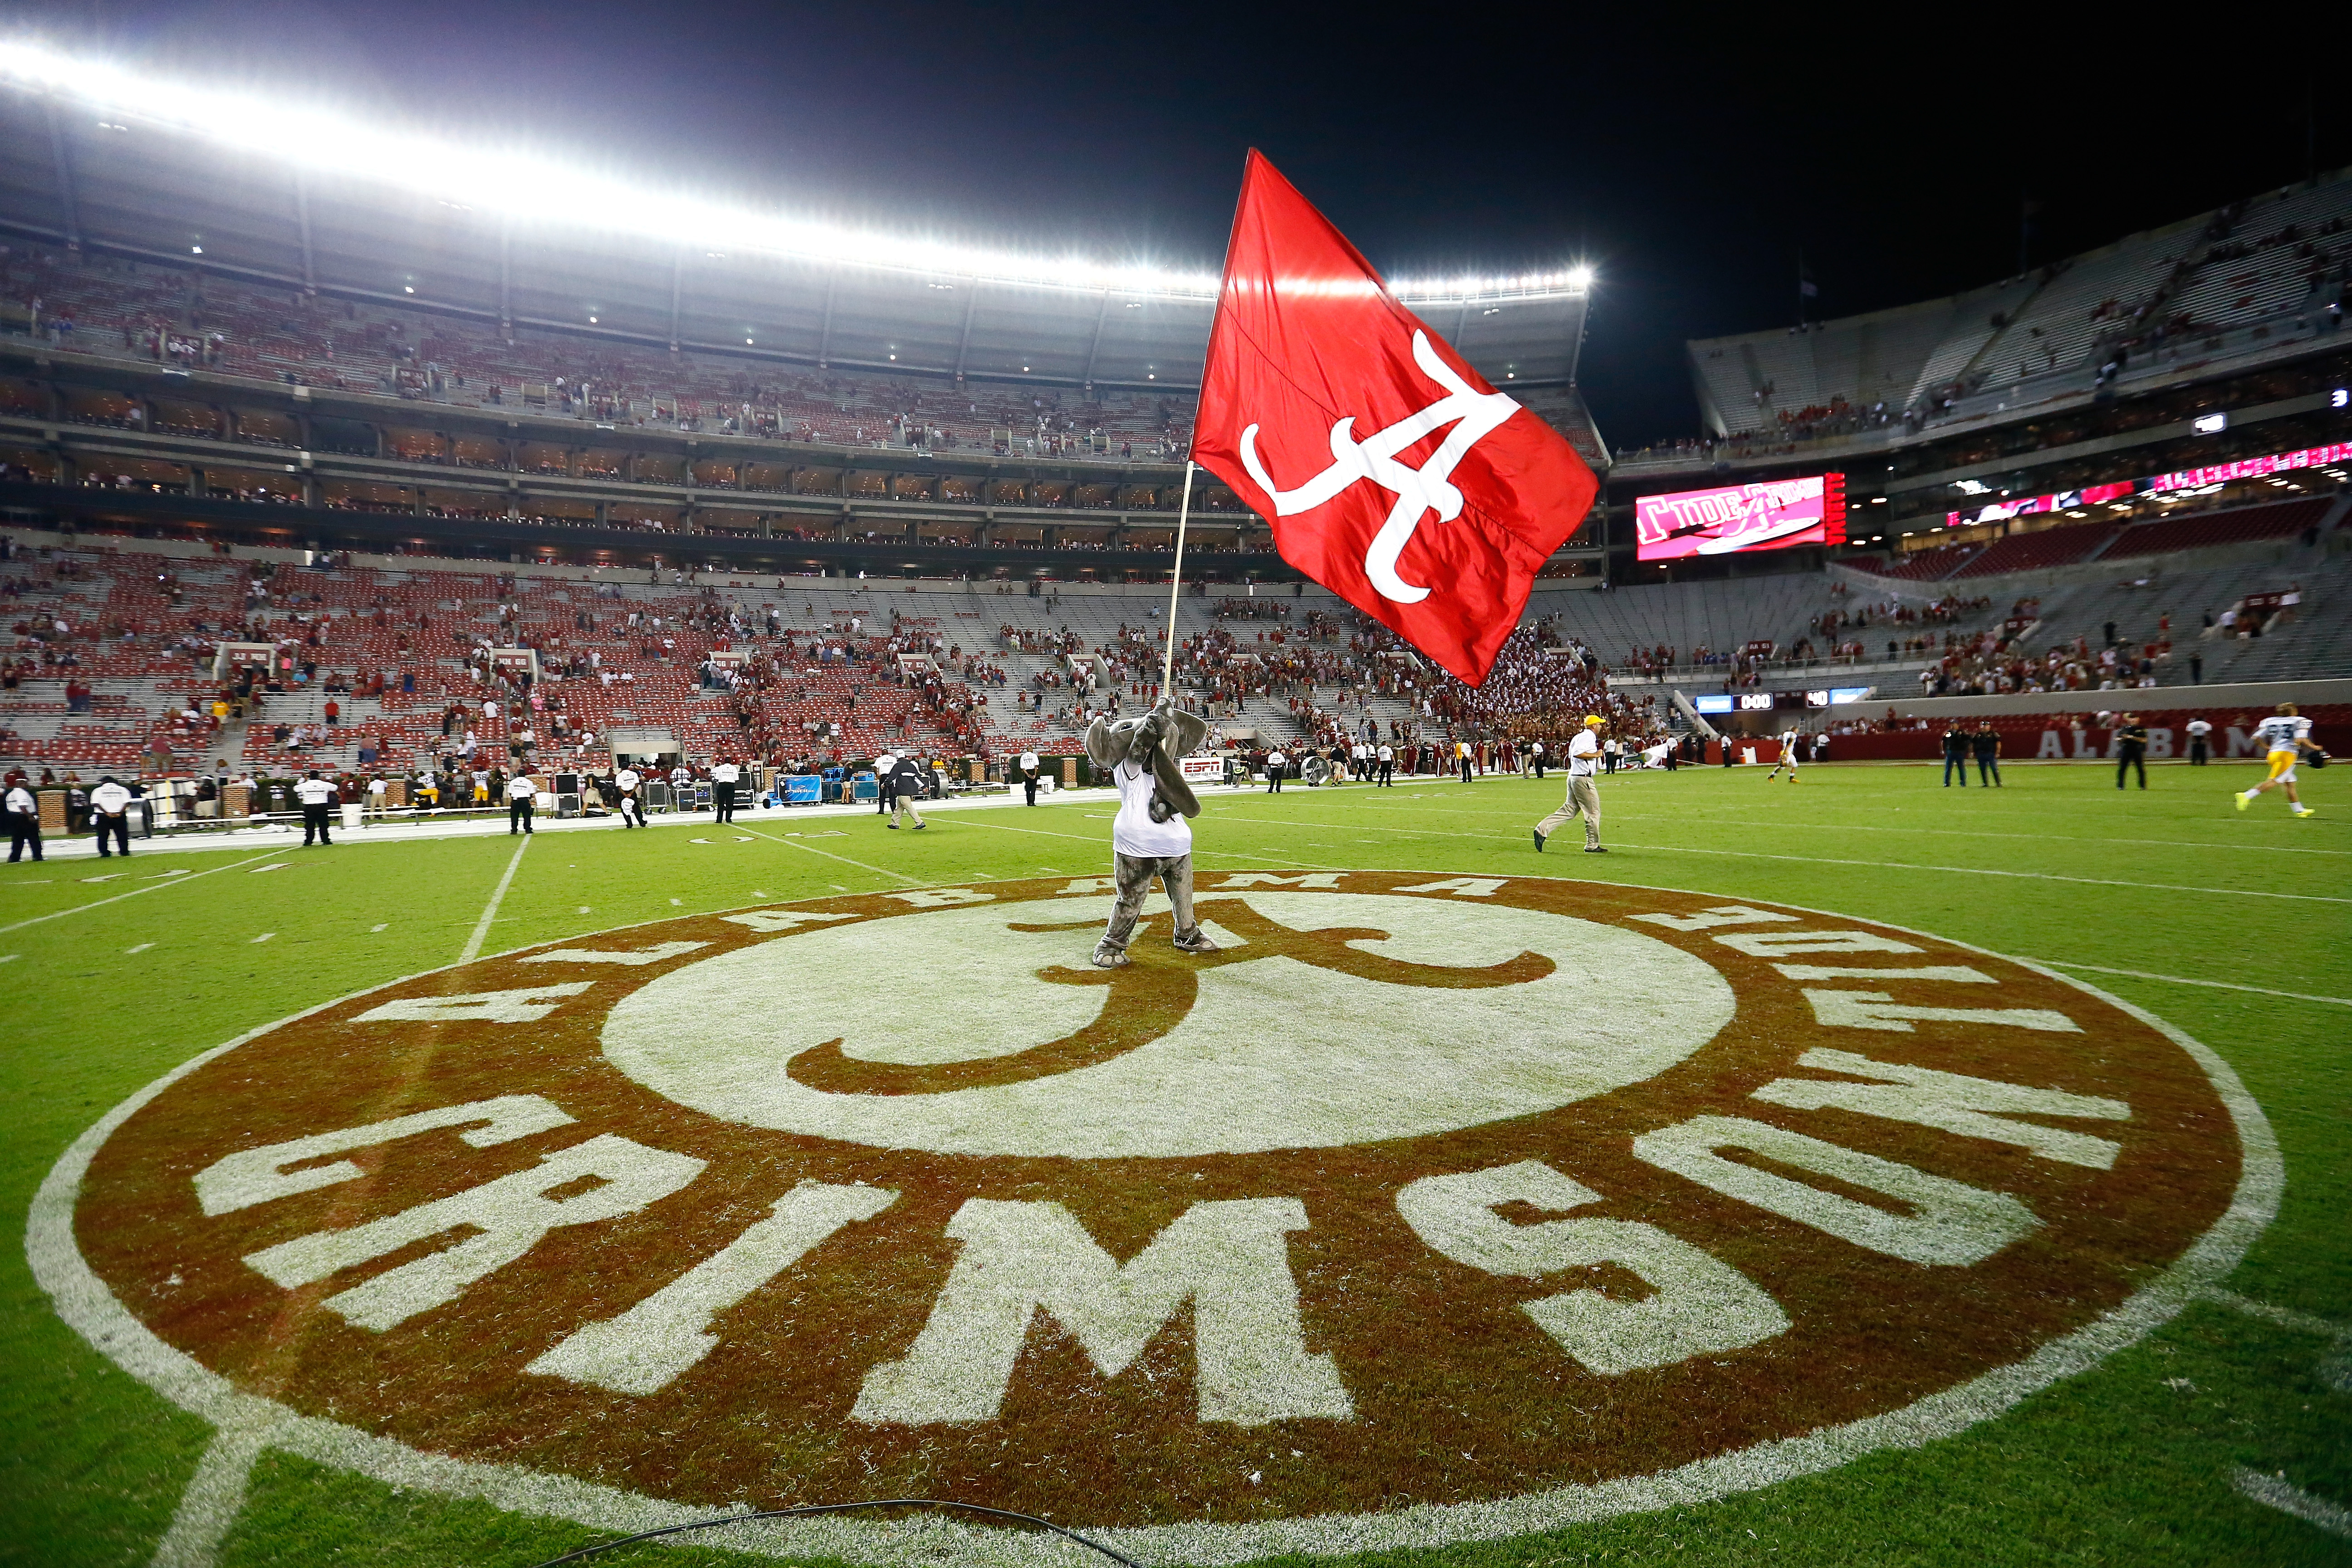 Big Al, mascot of the Alabama Crimson Tide, waves the flag after their 52-12 win over the Southern Miss Golden Eagles at Bryant-Denny Stadium in Tuscaloosa, Ala. on Sept. 13, 2014.